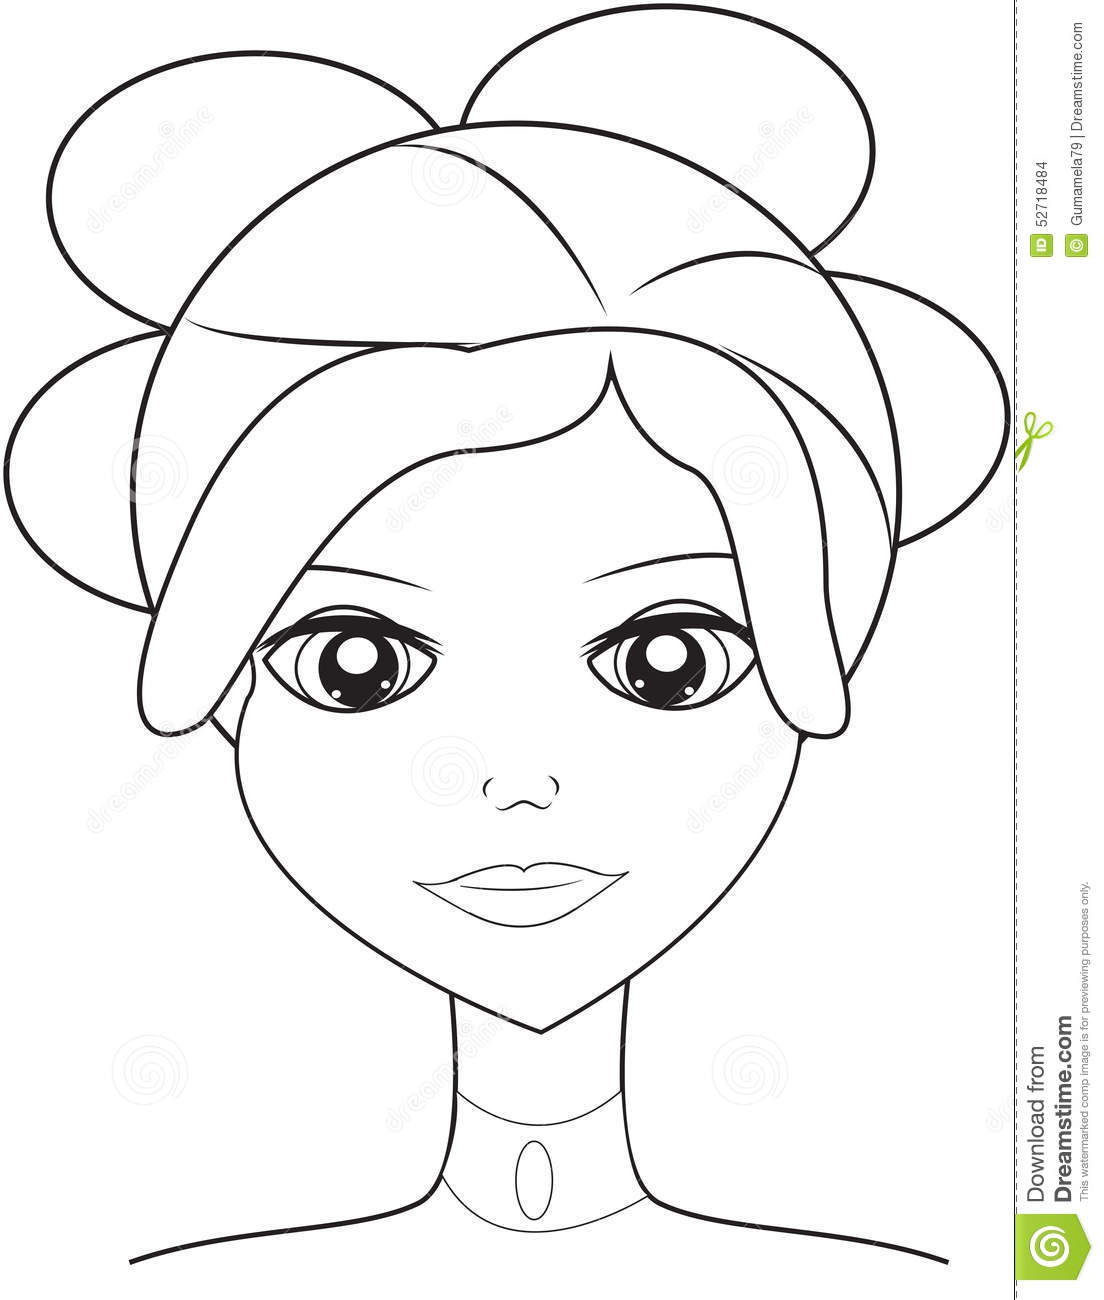 Face coloring #1, Download drawings